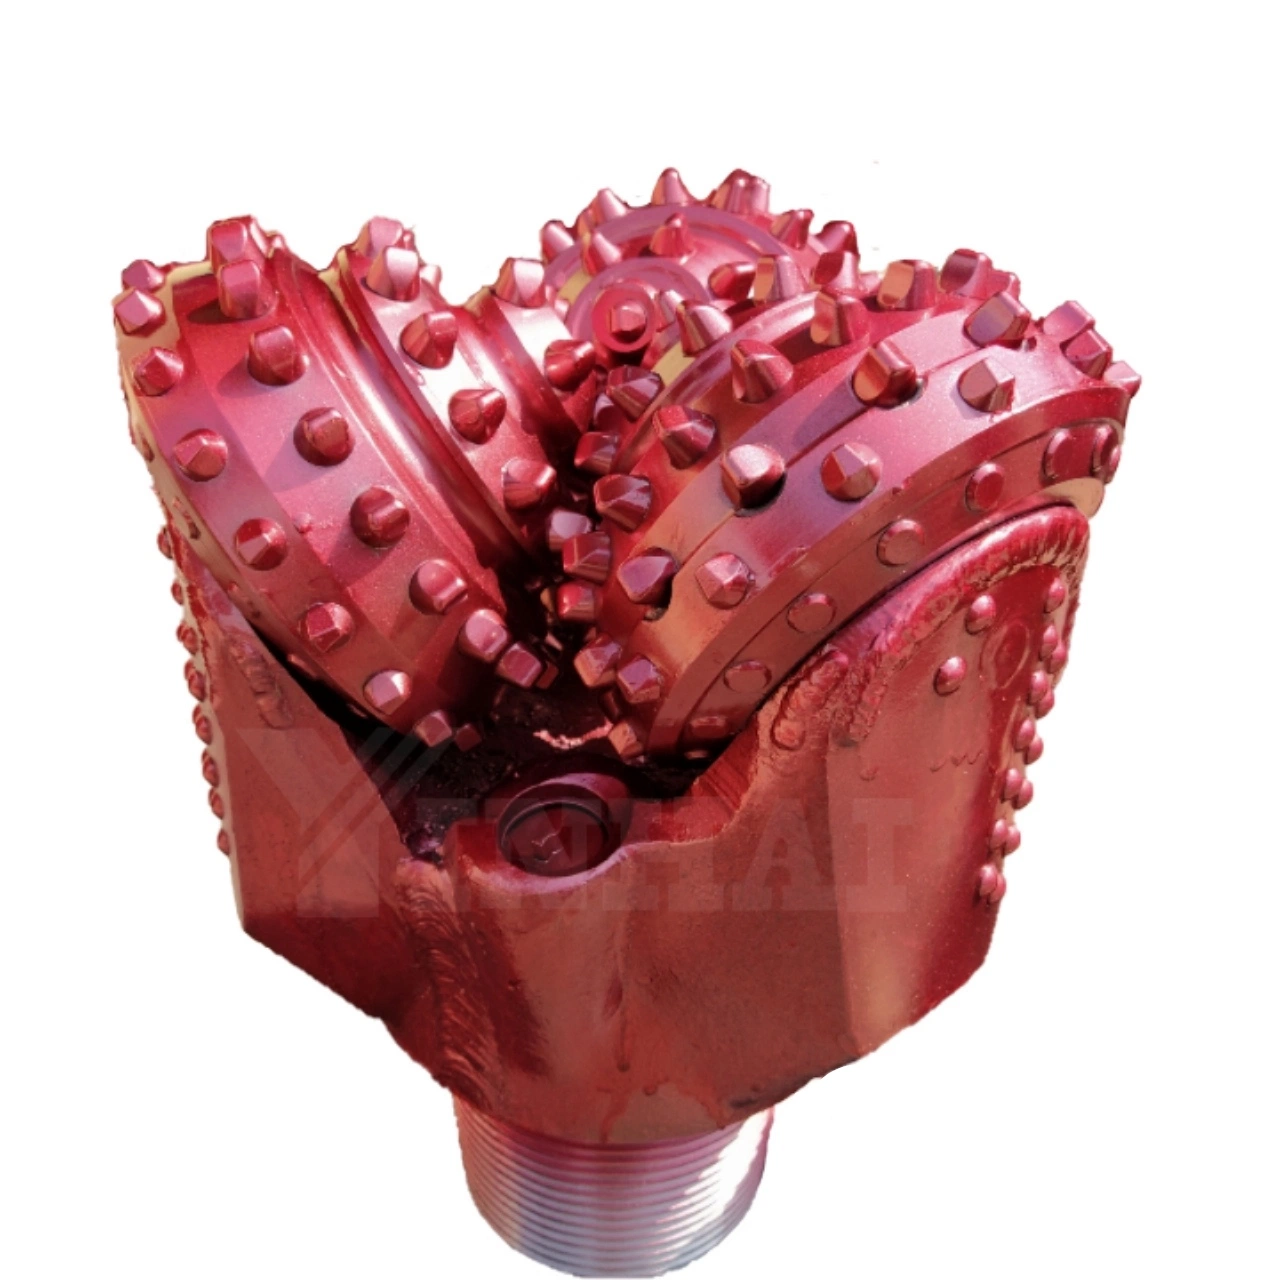 Factory Price API 12 1/4" Tricone Bit, 311.15mm Roller Cone Bit, Rock Drill Bit for Water or Oil/Gas Well Drilling